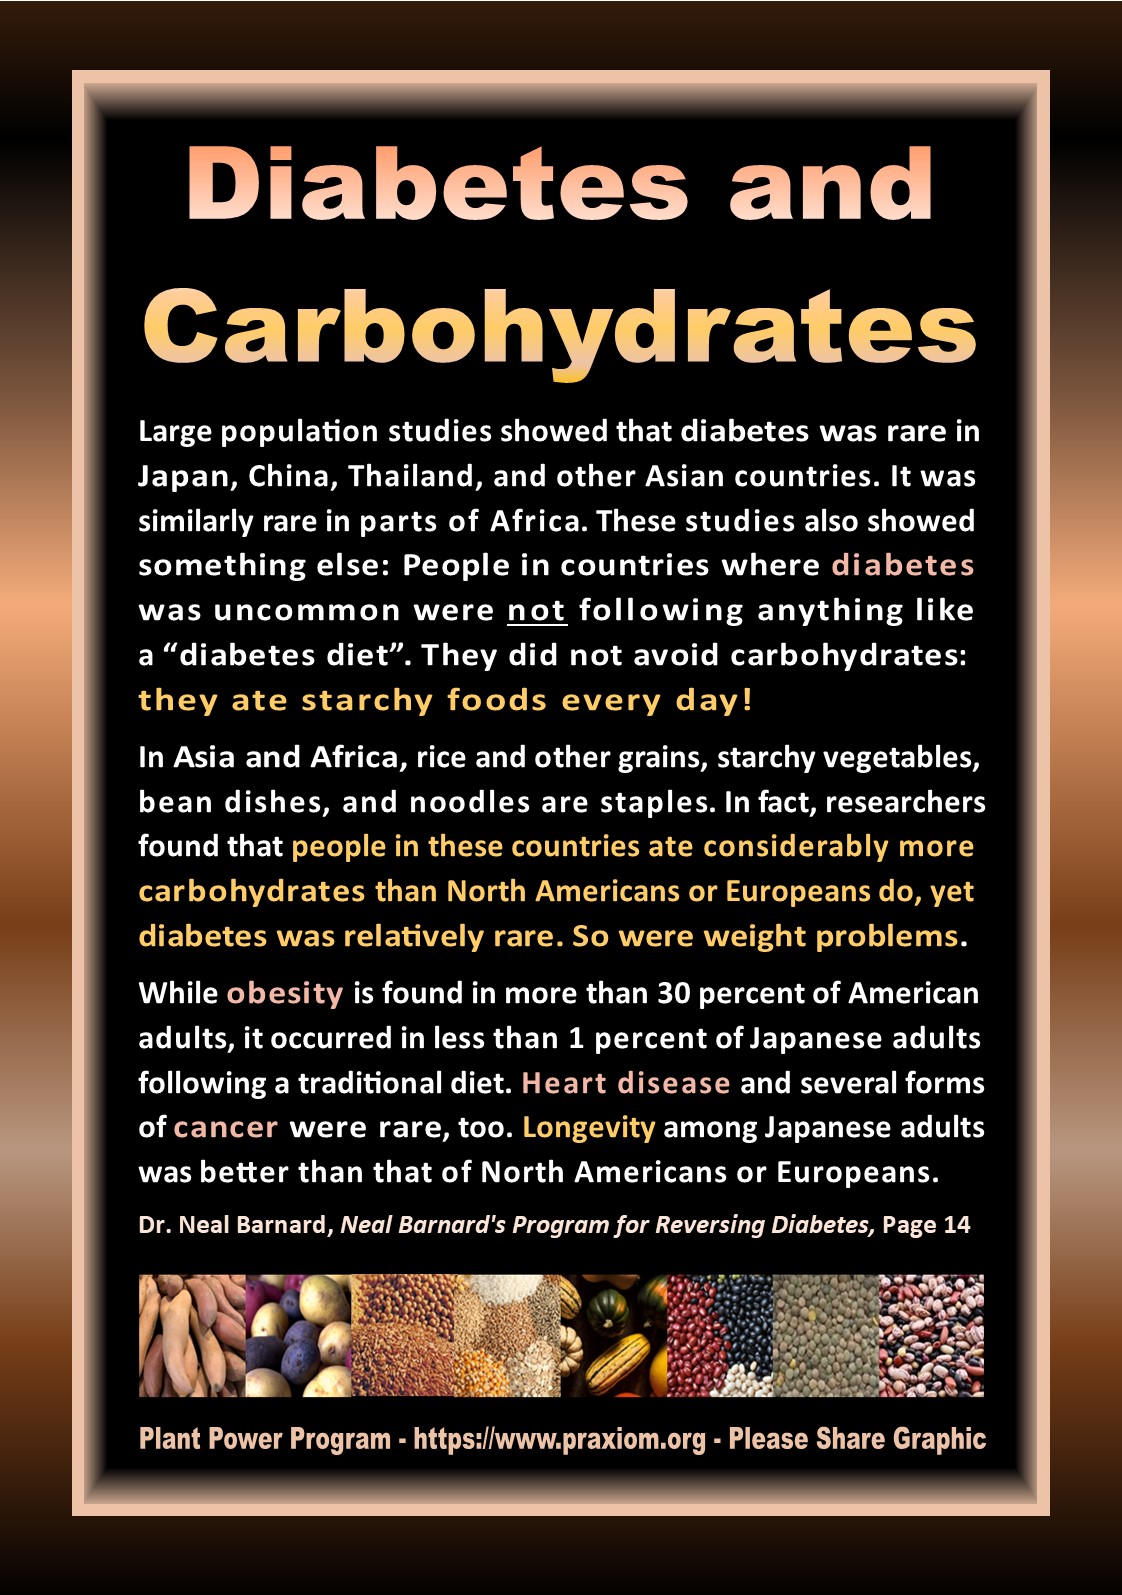 Carbohydrates and Diabetes - Dr. Neal Barnard